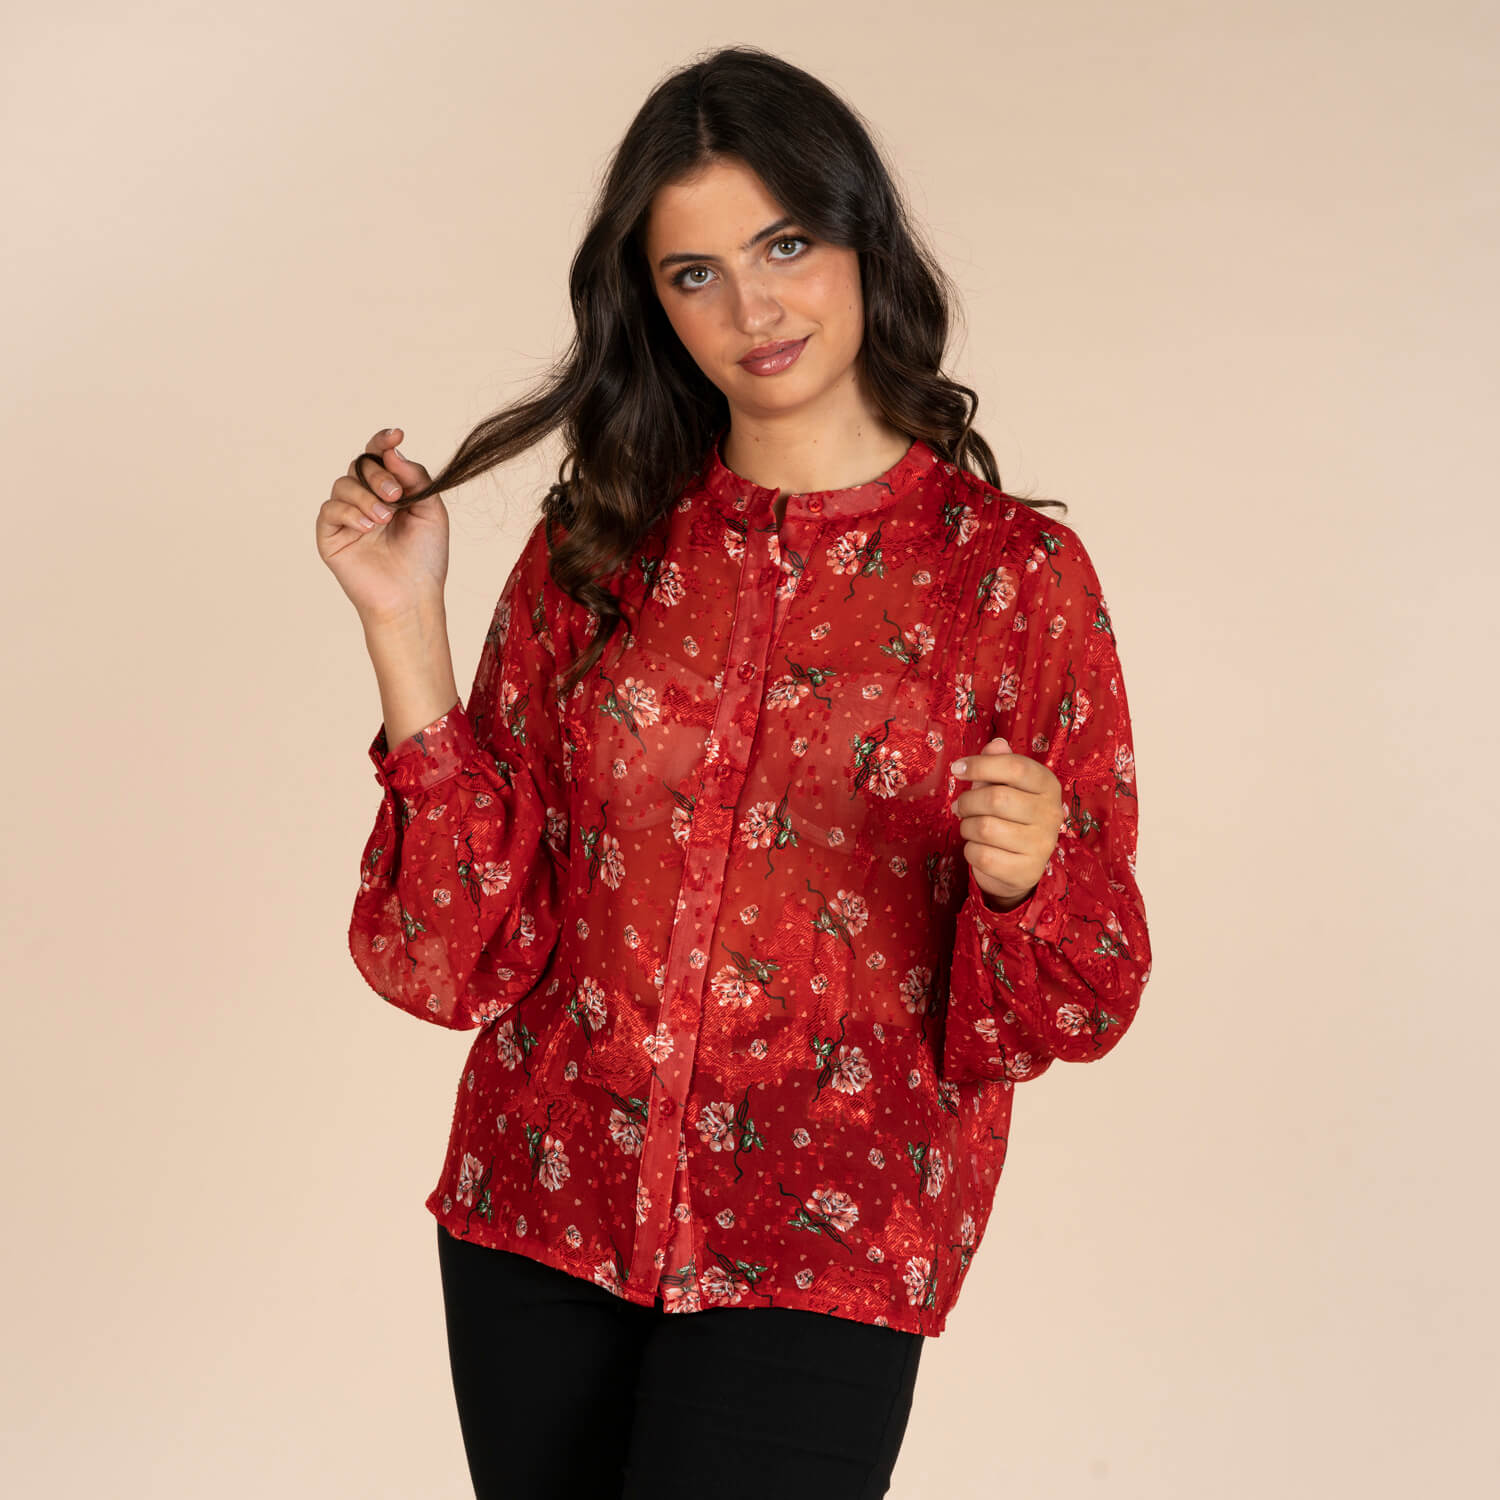 Naoise Pleat Neck Blouse - Red 4 Shaws Department Stores